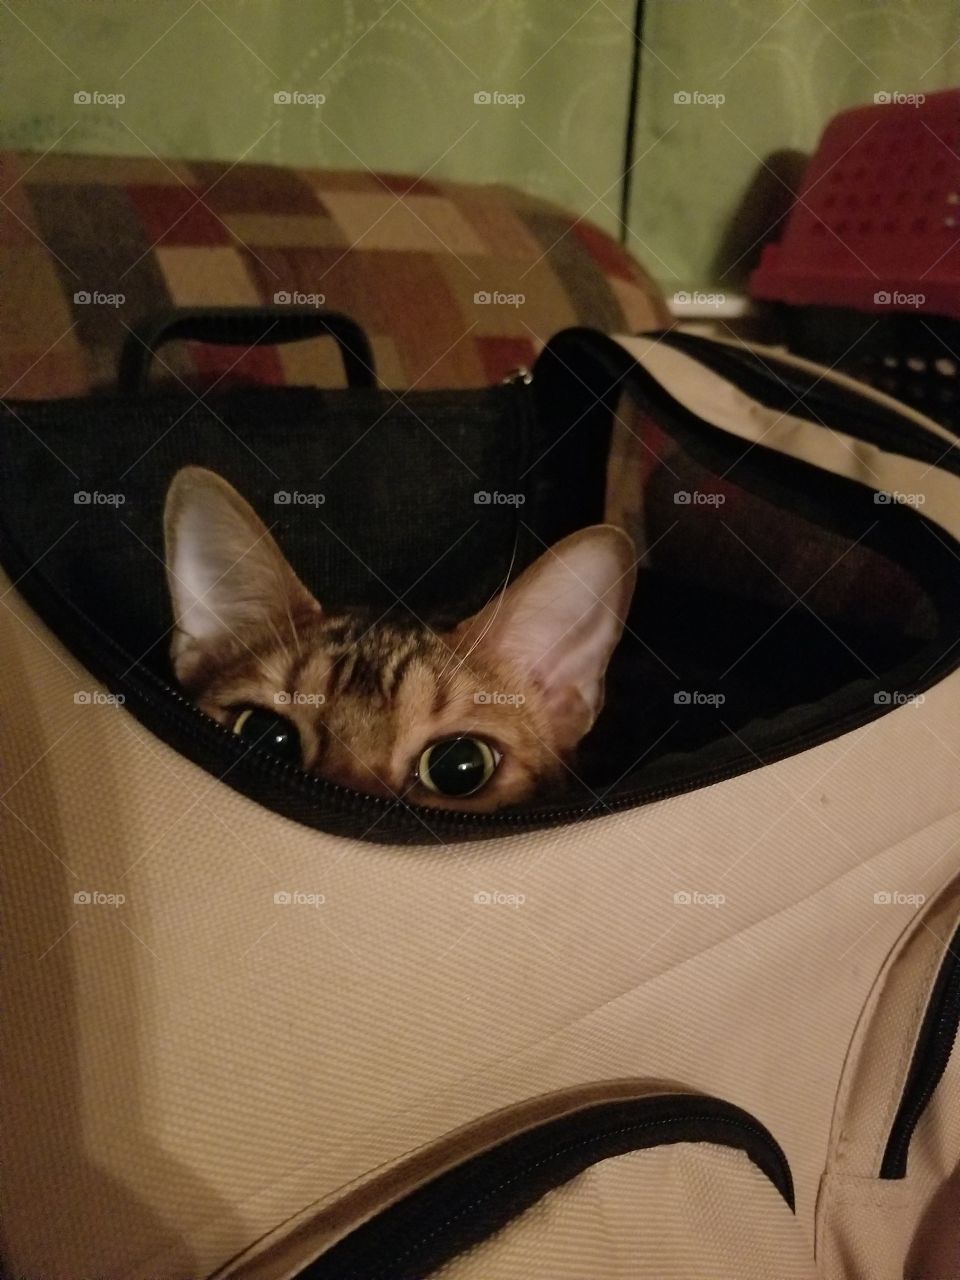 Bengal Cat hiding in a carrier. Sneaky pets. cat ears and eyes. fun and playful pets. Adorable cat moments.